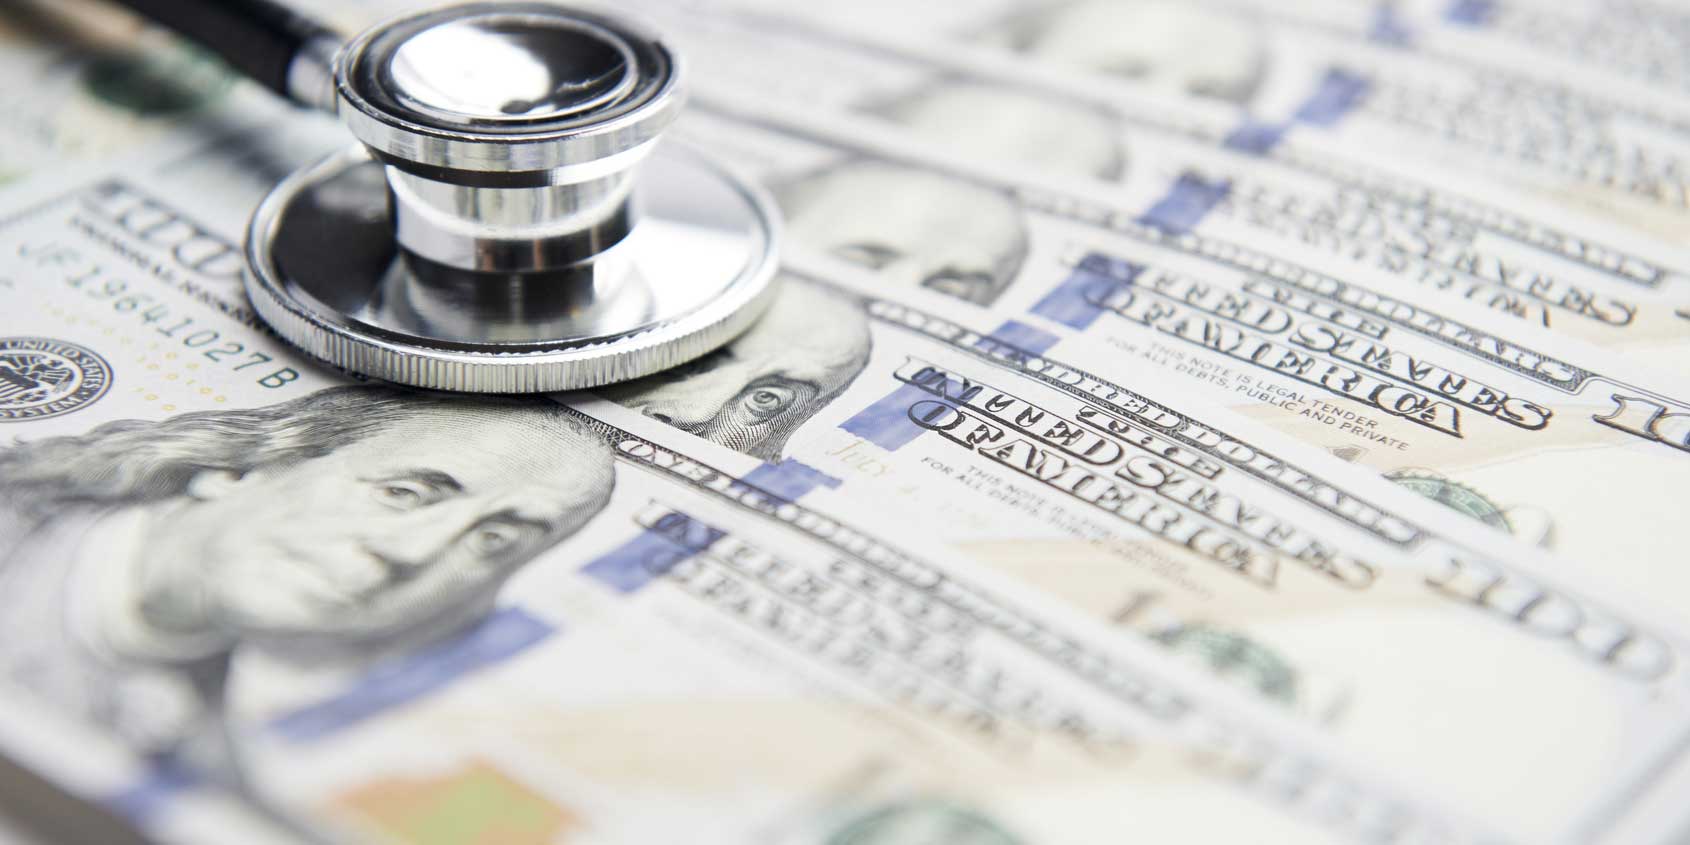 Health Care Swindle: What Is Your Medical Bill Concealing?